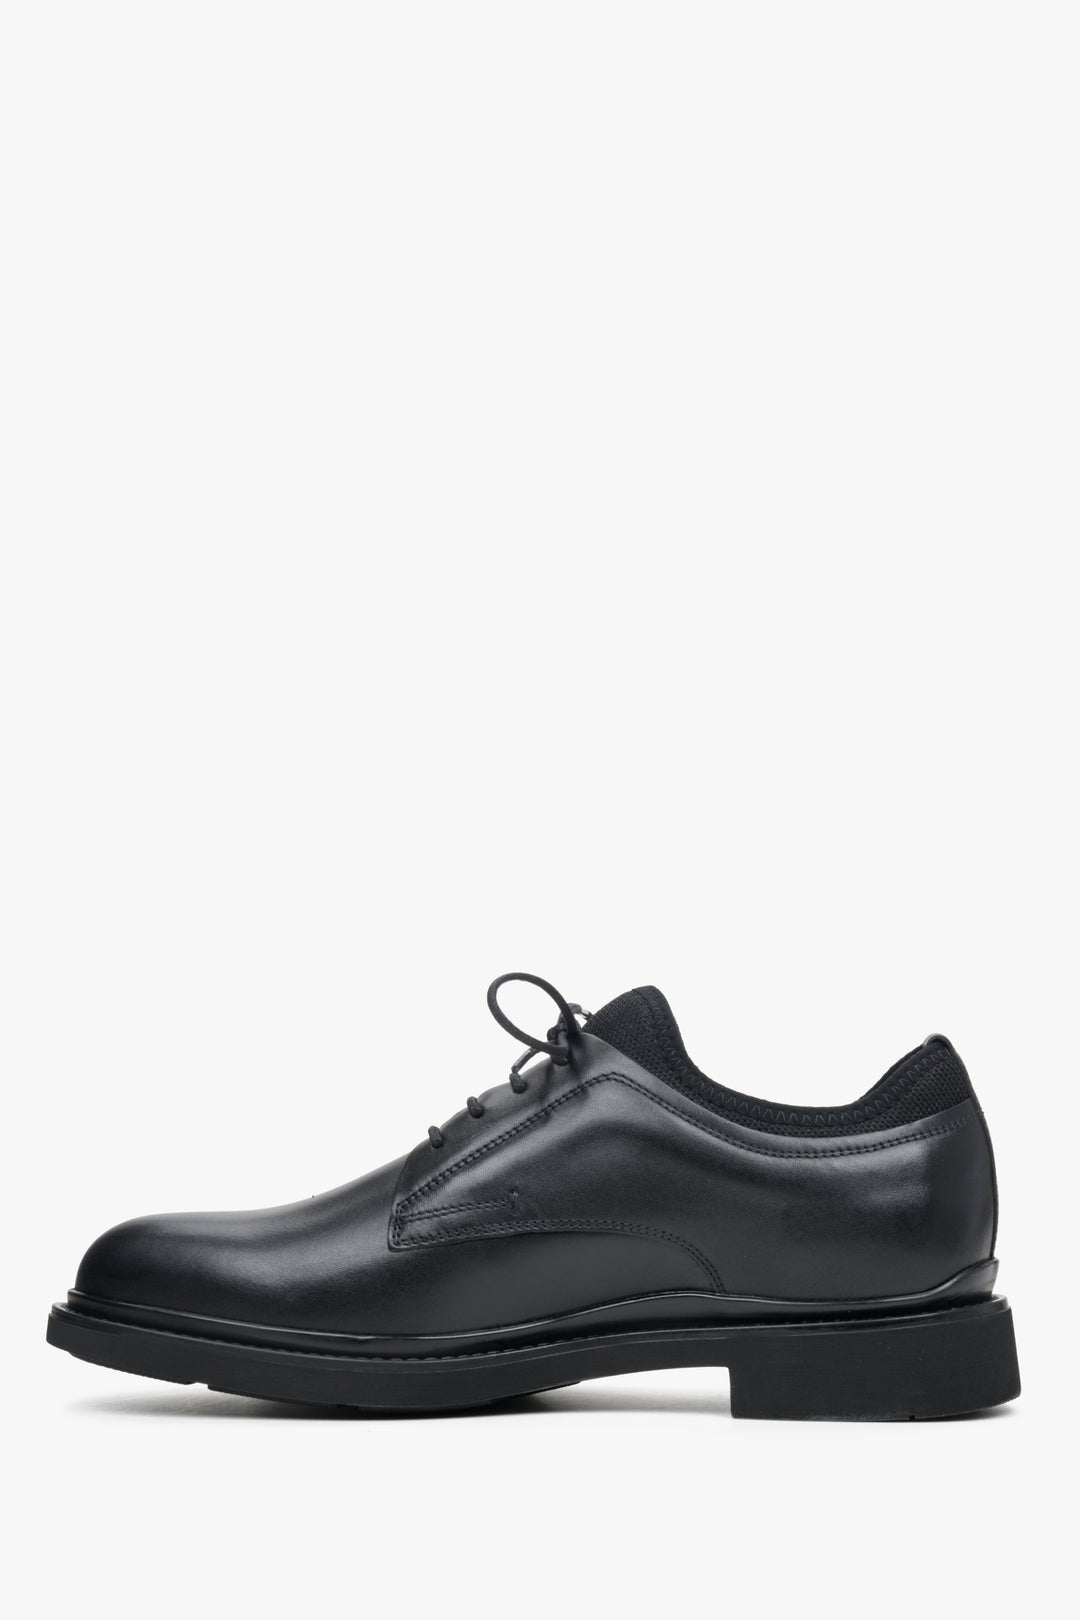 Comfortable, men's black lace-up shoes made of genuine leather by Estro - shoe profile.